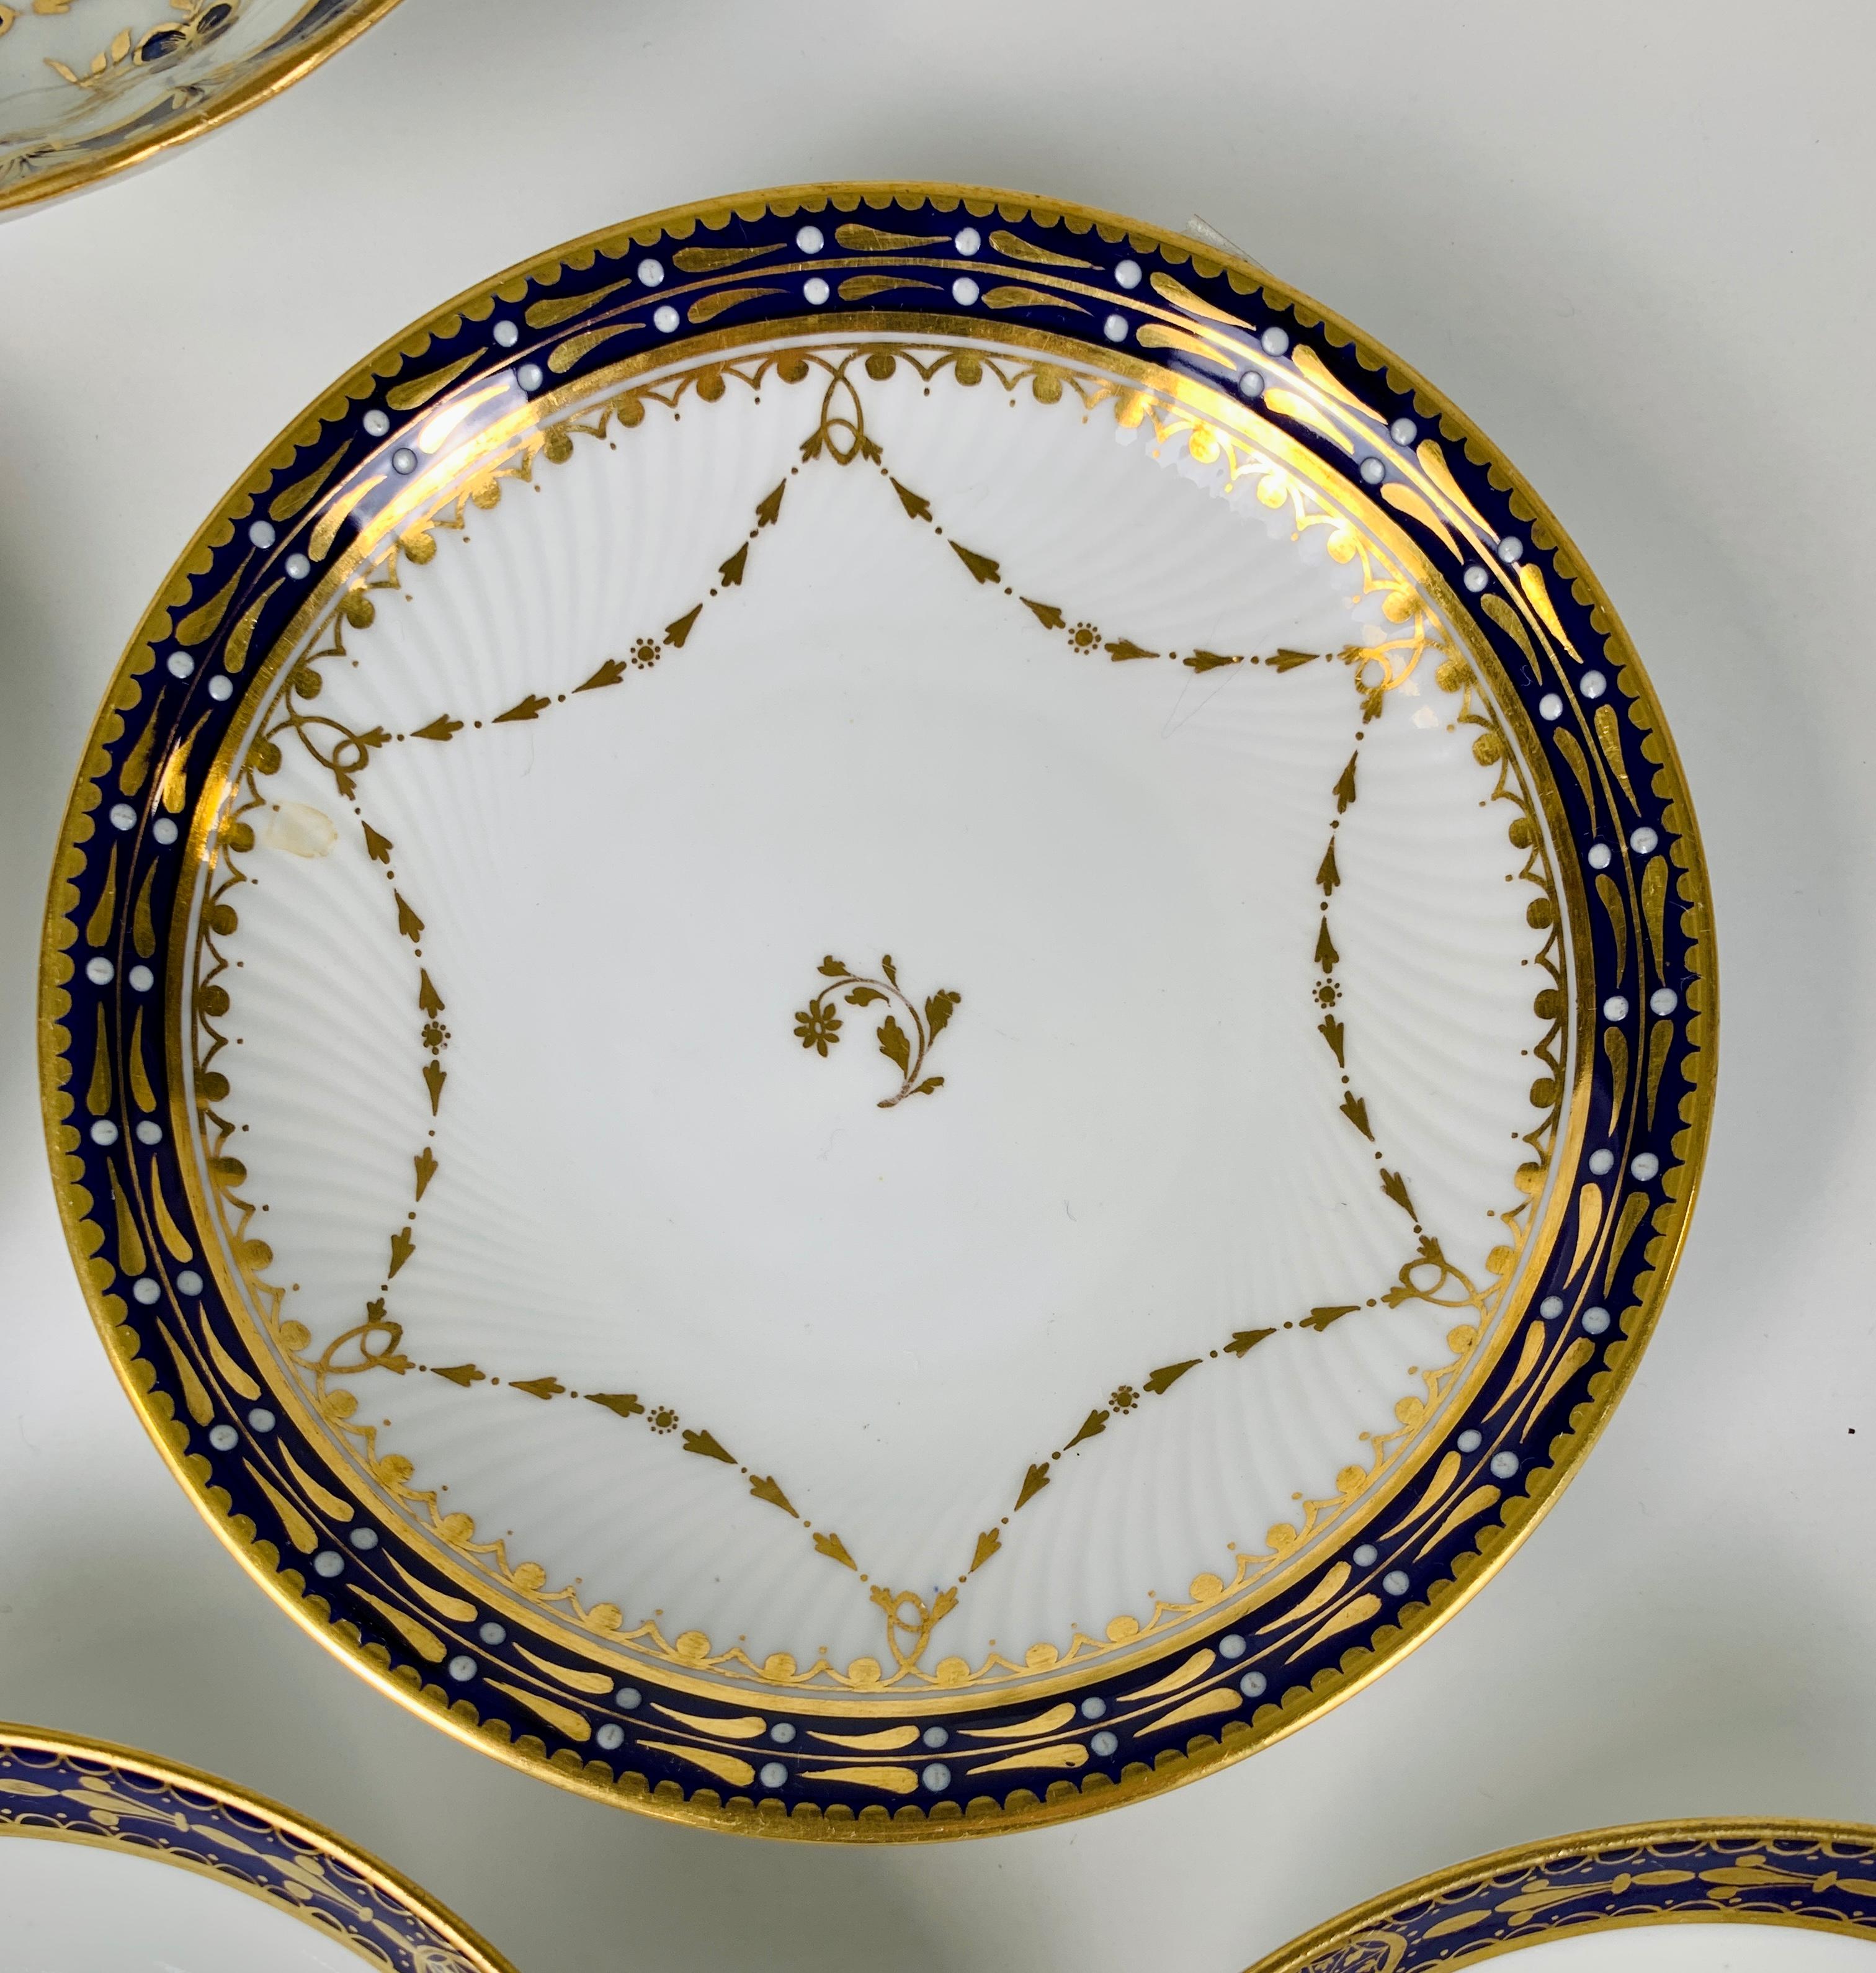 Six antique porcelain saucers with cobalt blue and gold borders were made in England in the late 19th century. The gilded decoration is simple and refined in the Regency style.
Dimensions: 5.25